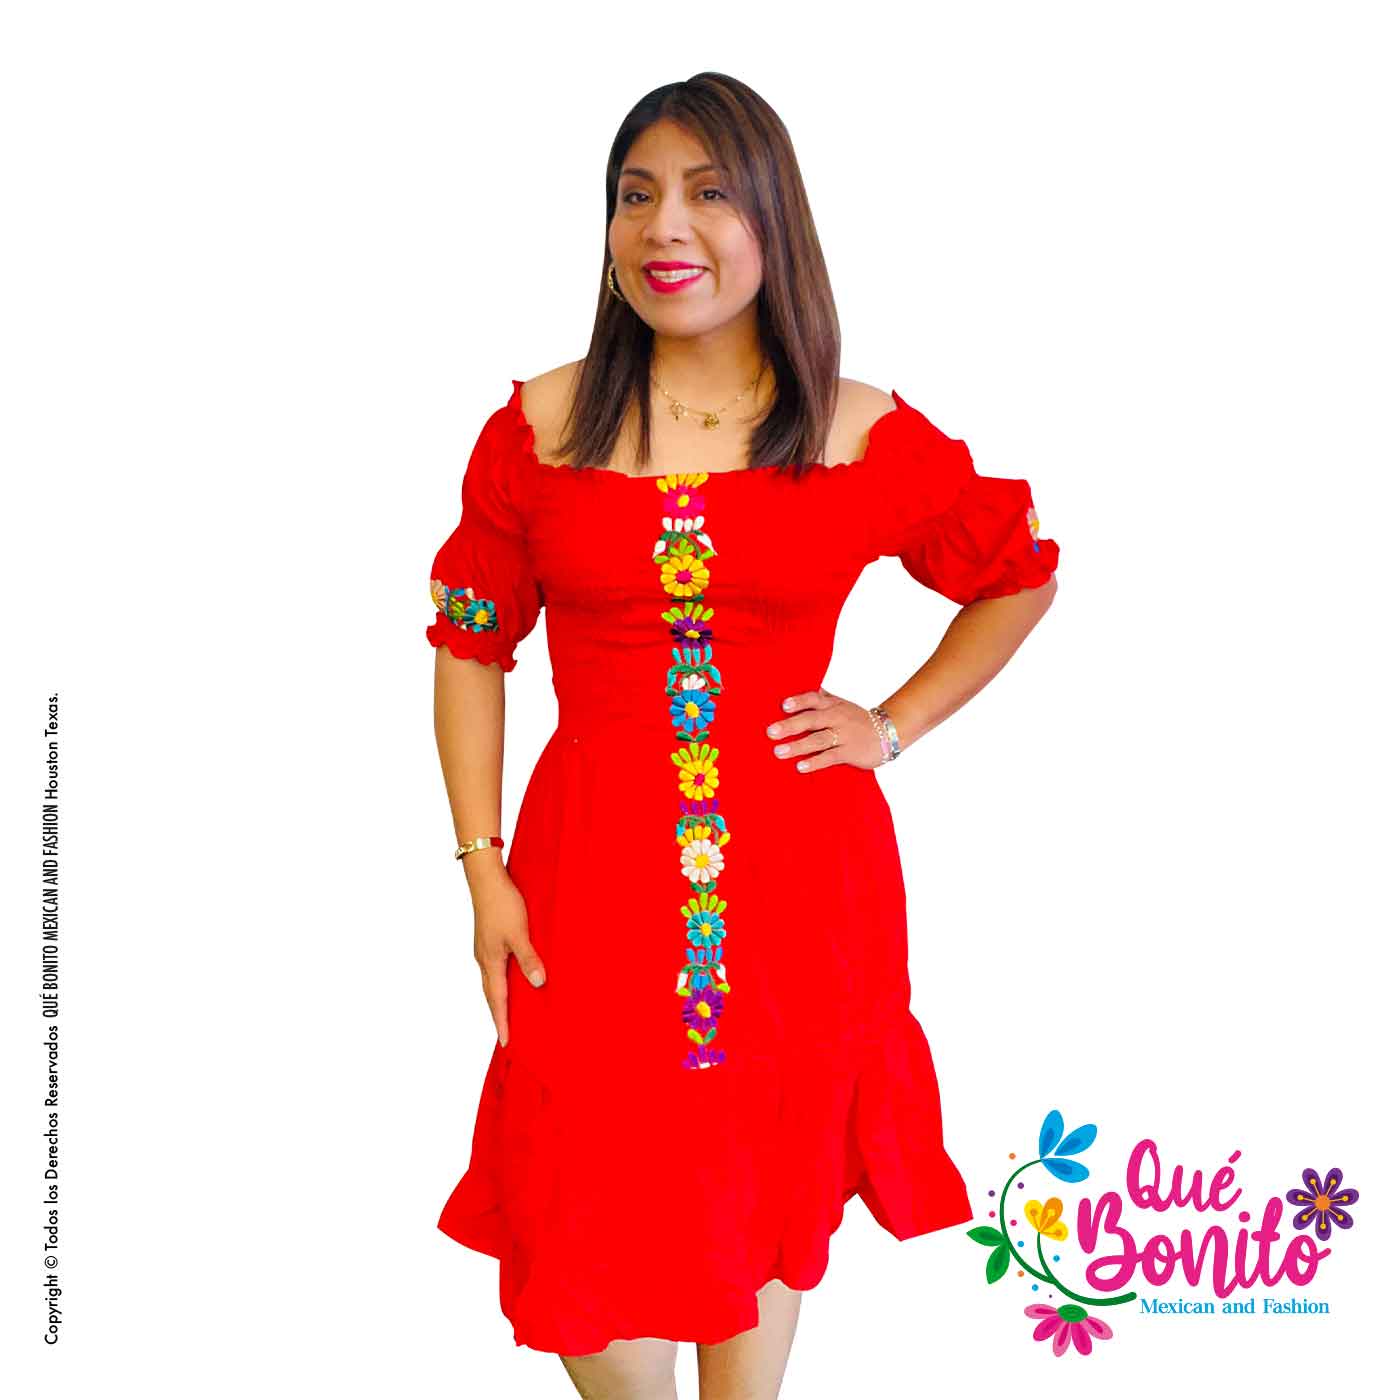 Innombrable Red Dress Que Bonito Mexican and Fashion